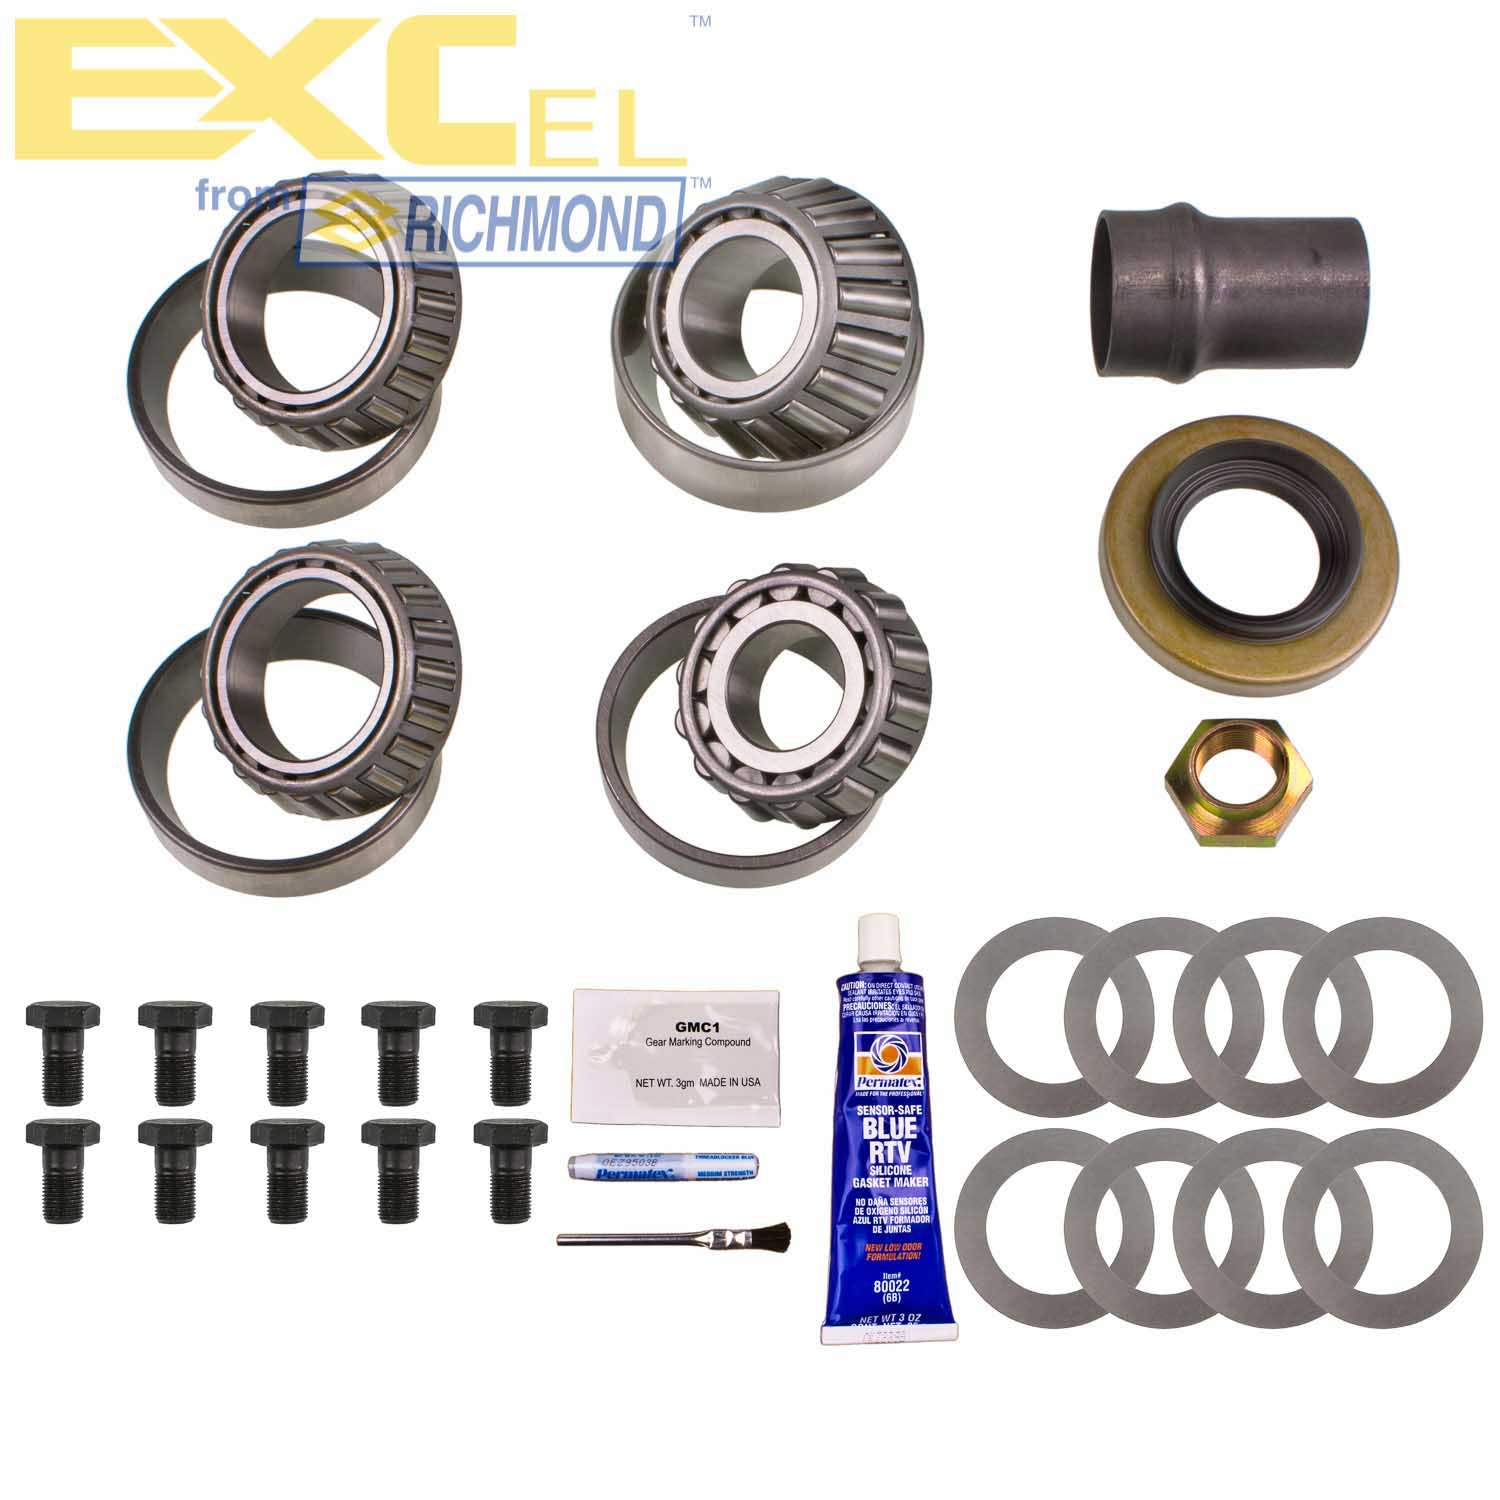 Excel XL-1030-1 Differential Bearing Kit